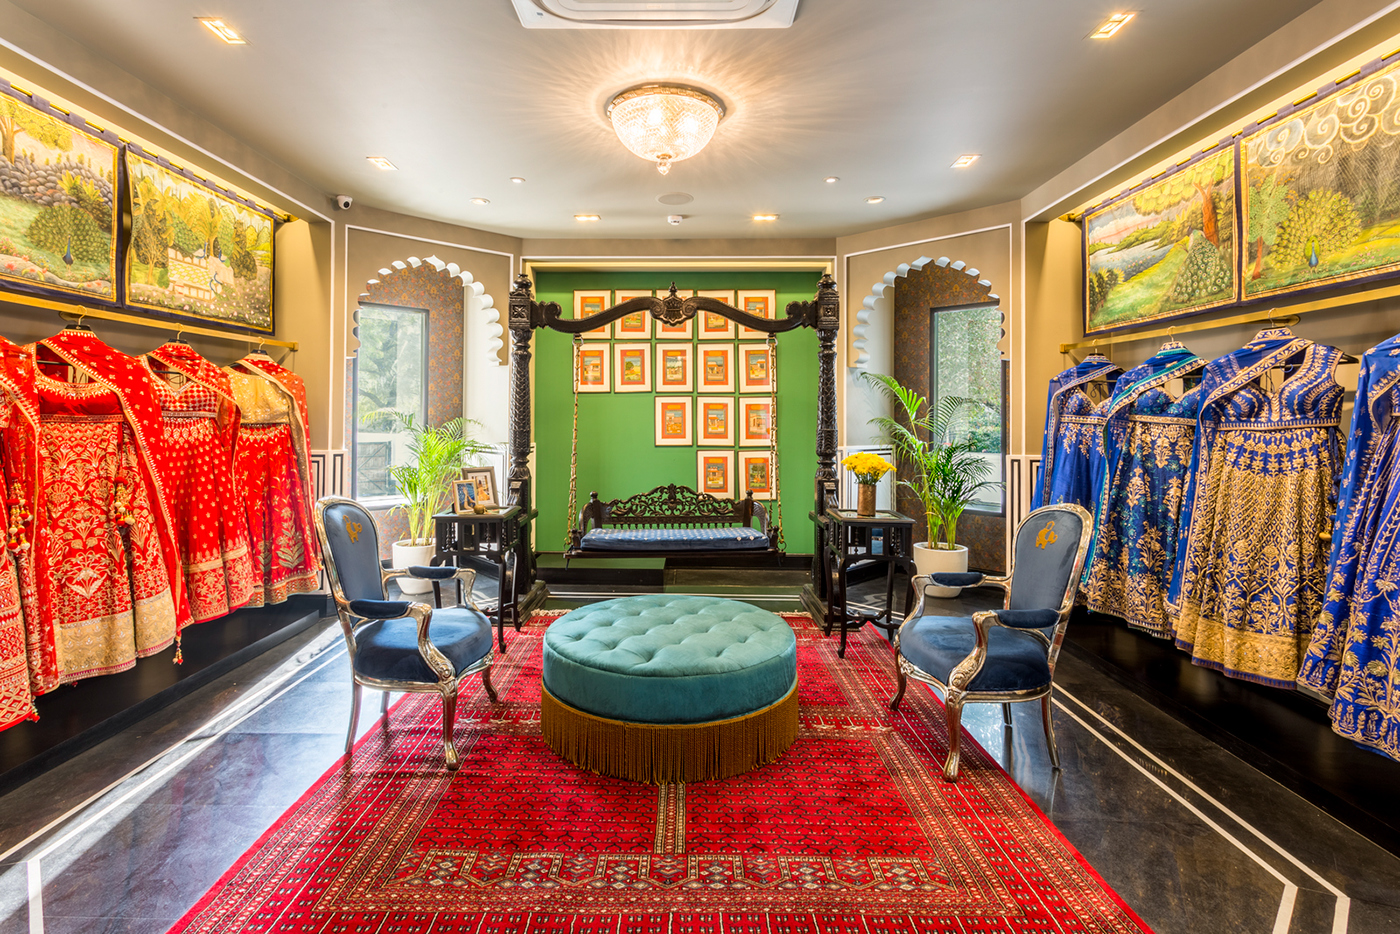 interiors India Ethnic colorful Anita Dongre HDR